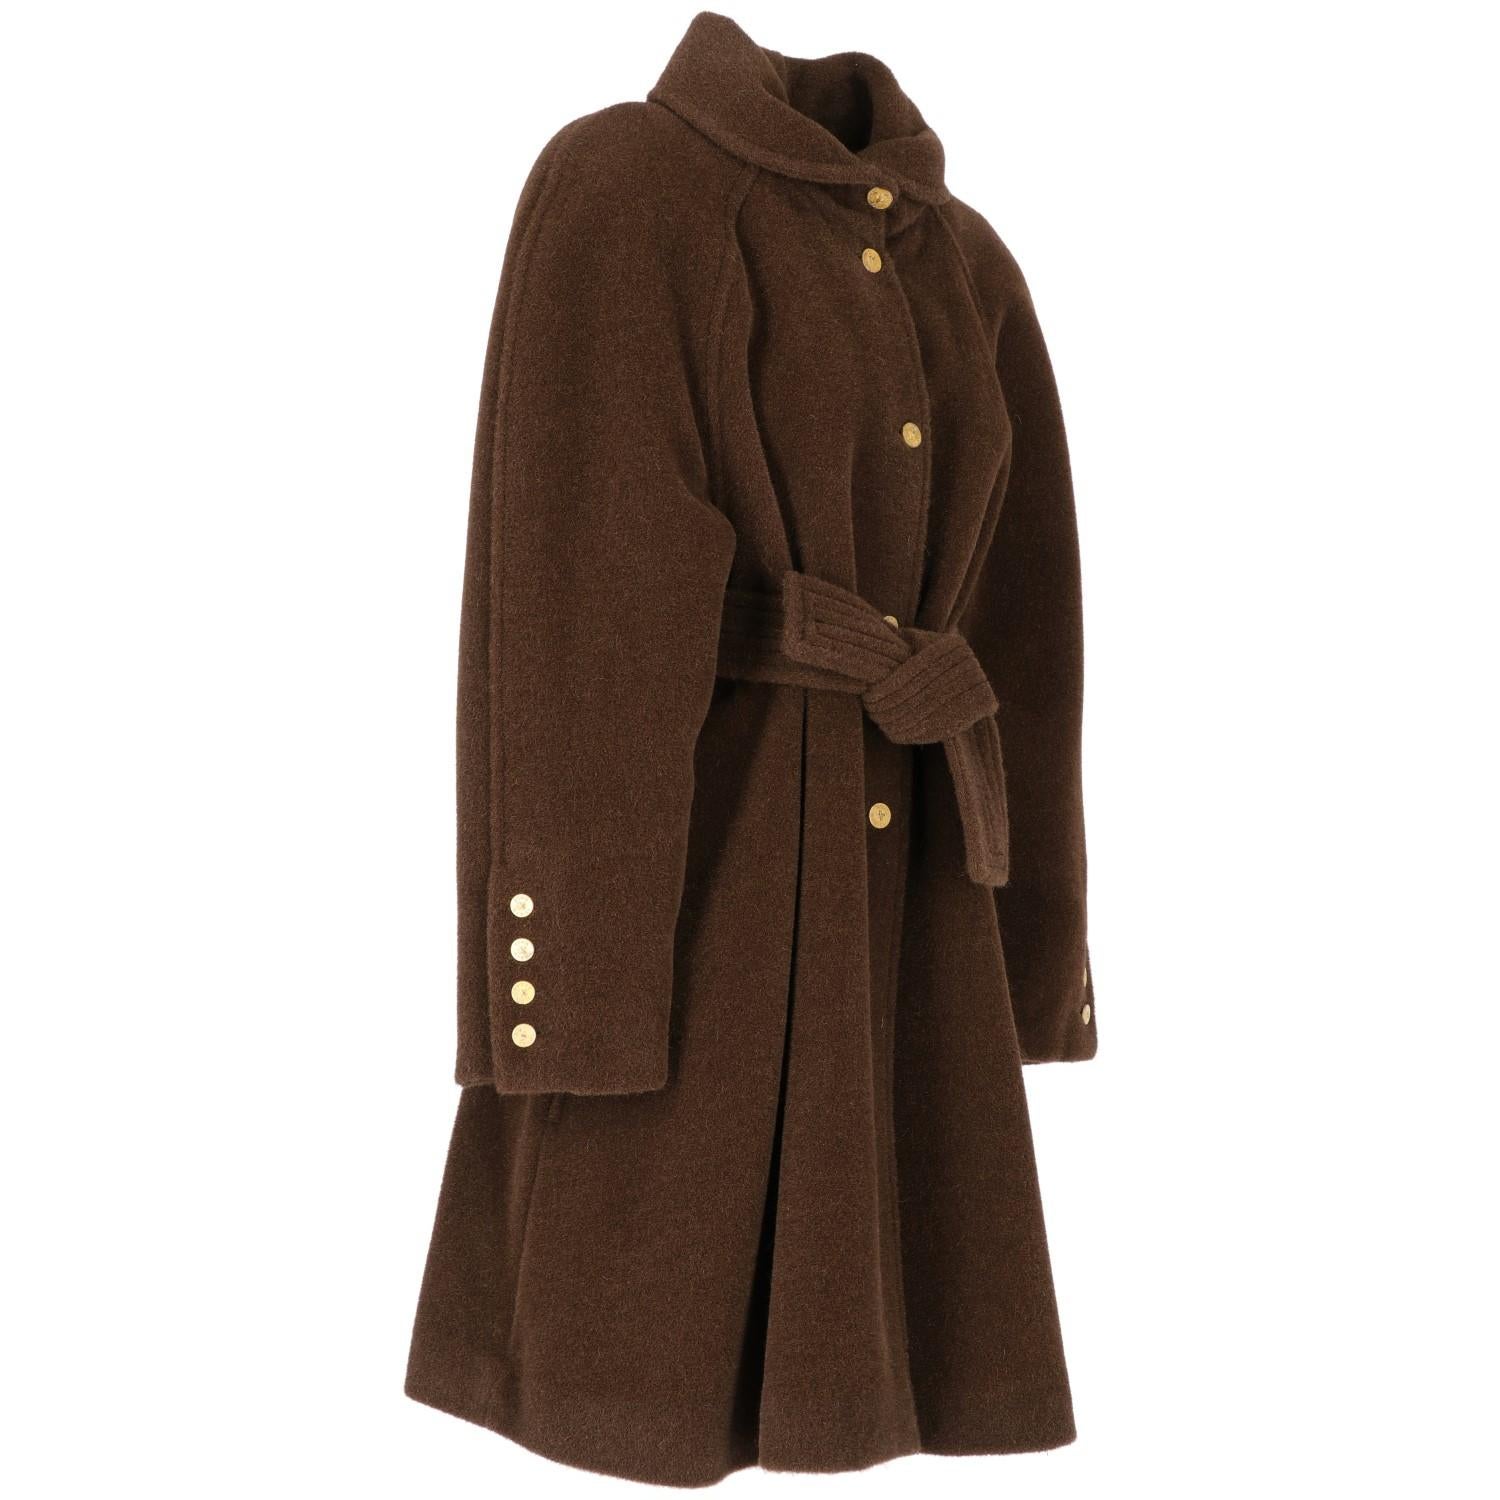 The Sonia Rykiel brown alpaca wool classic collar coat features raglan sleeves, a front fastening and cuffs with branded gold tone metal buttons, side pockets and waist belt. This coat is in perfect conditions.

Years: 1980s

Made in France

Size: